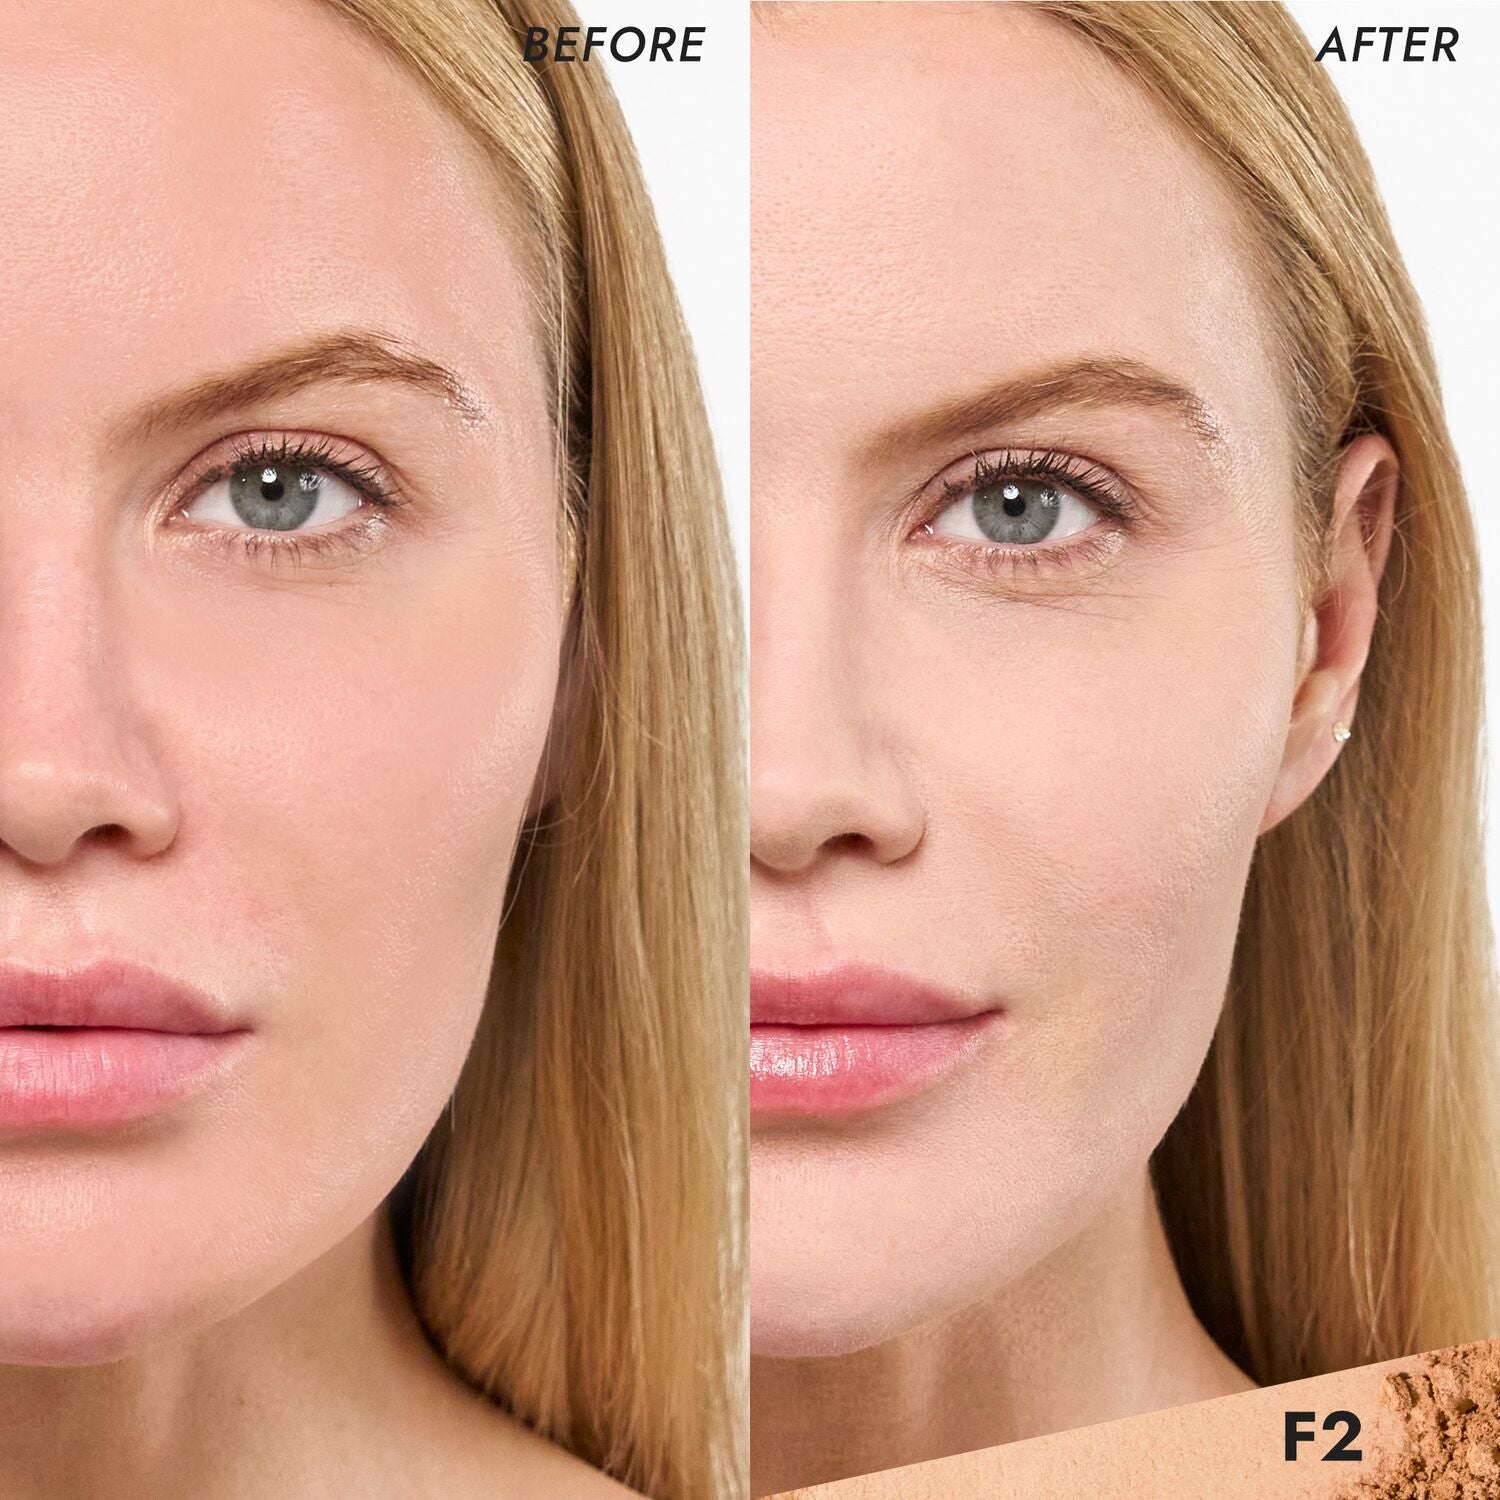 Coverfx Pressed Mineral Foundation model before and after image in shade  F2